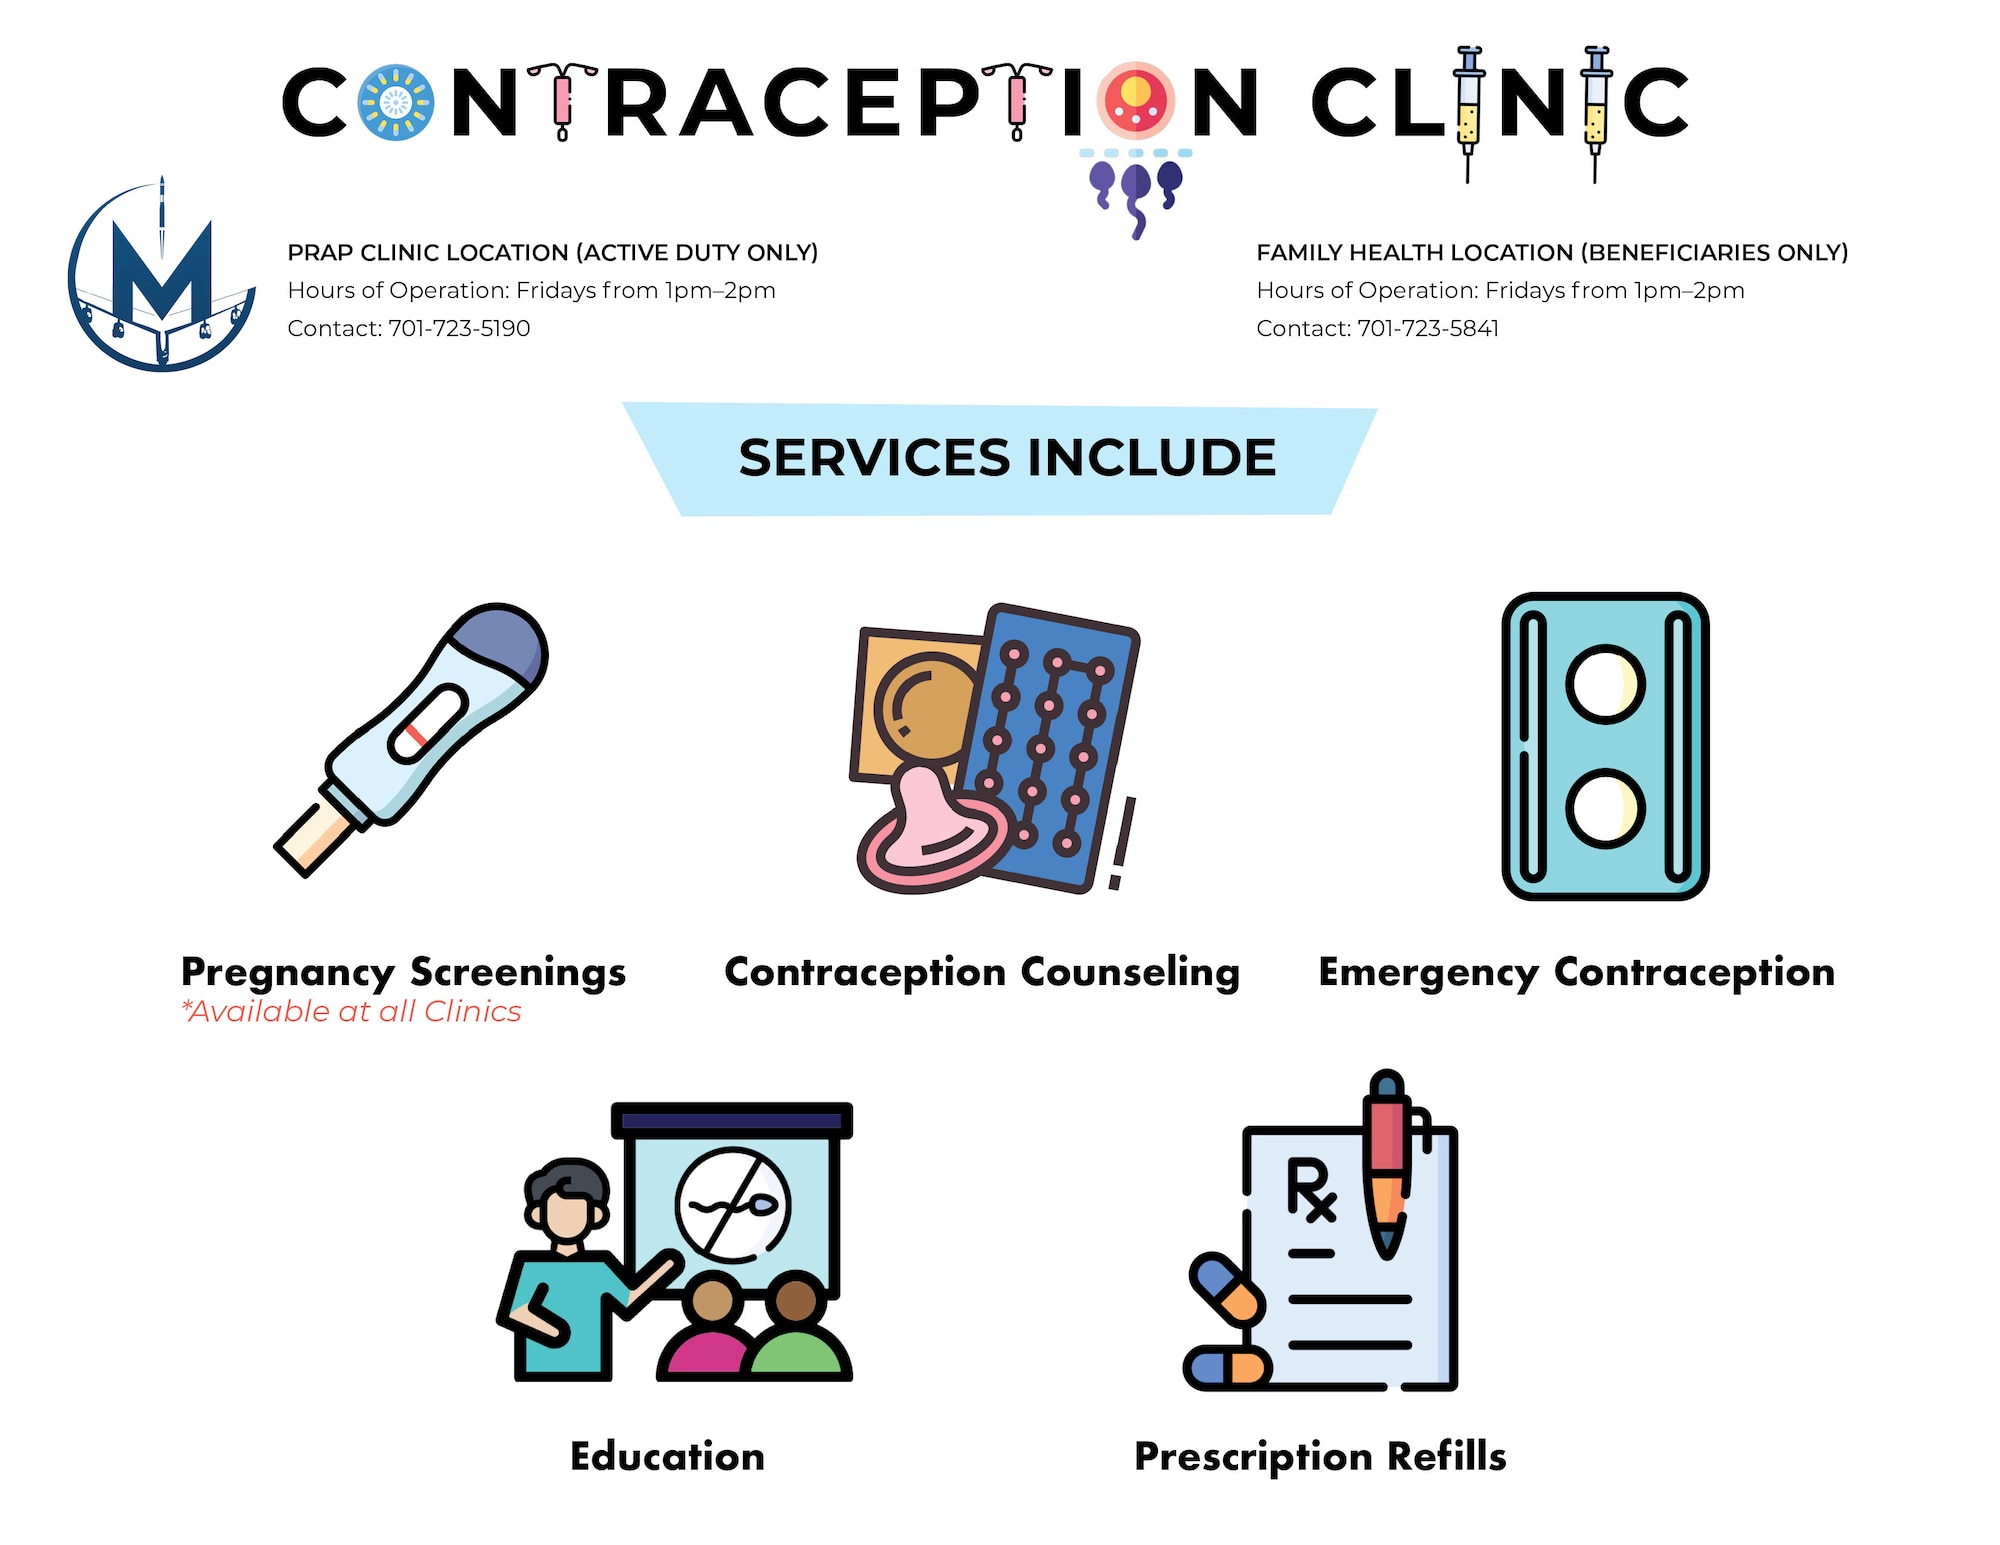 Contraception Clinic Infographic. (U.S. Air Force Graphic by Master Sgt. Ryan Bell)